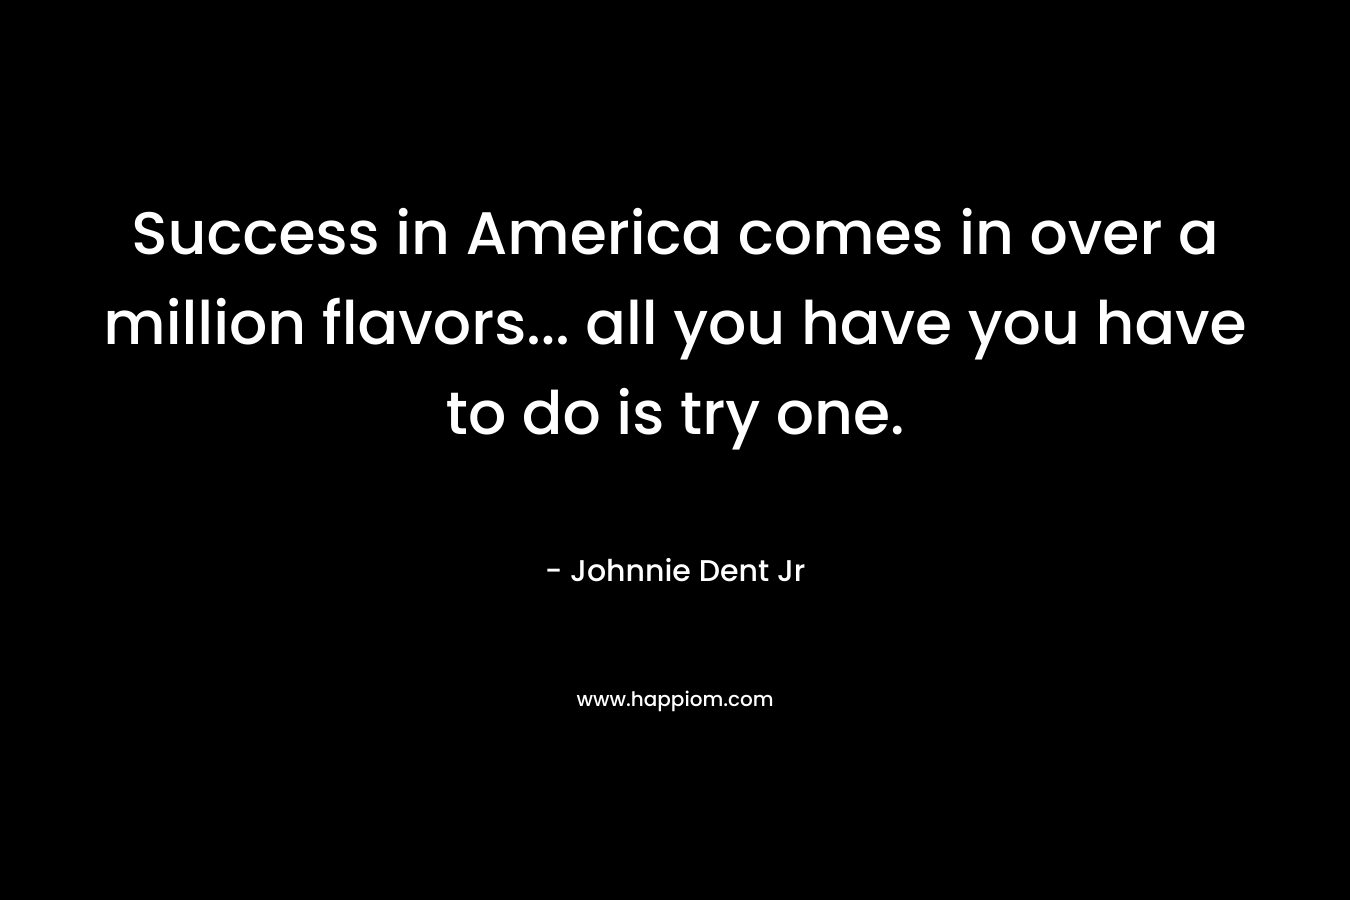 Success in America comes in over a million flavors… all you have you have to do is try one. – Johnnie Dent Jr